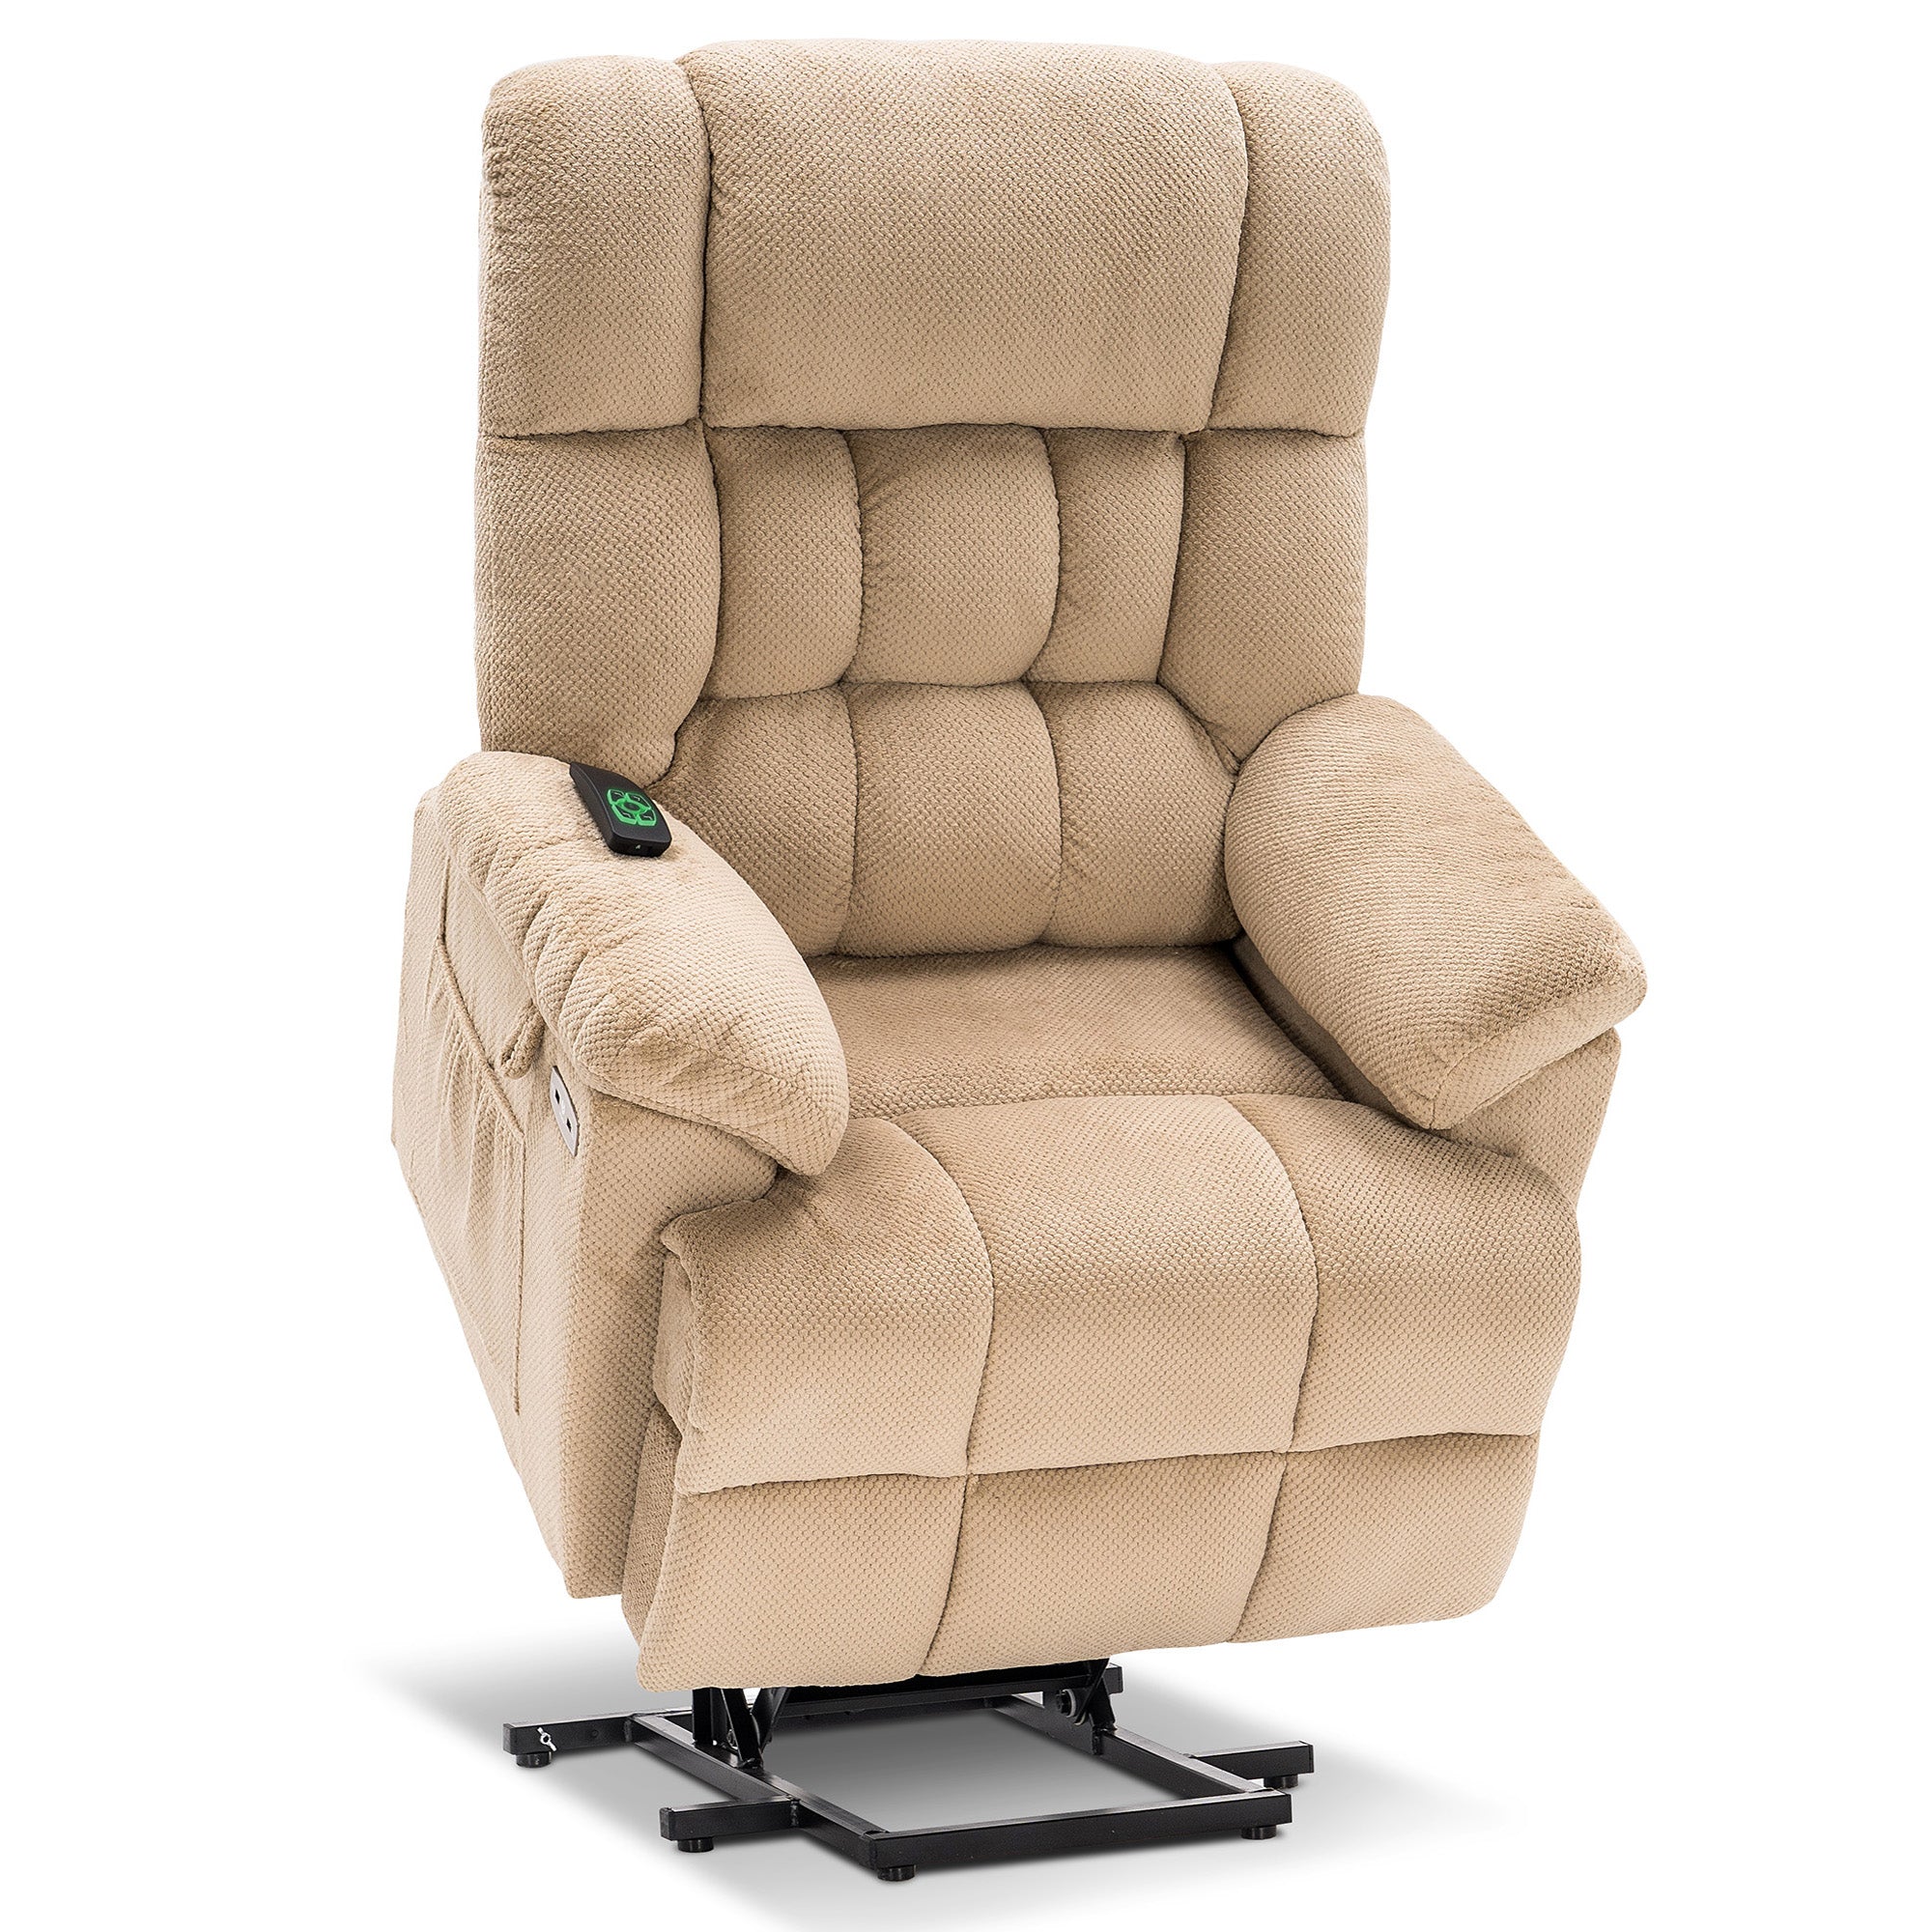 MCombo Power Lift Recliner Chair with Massage and Heat, Adjustable Headrest & Extended Footrest for Elderly People, 7533